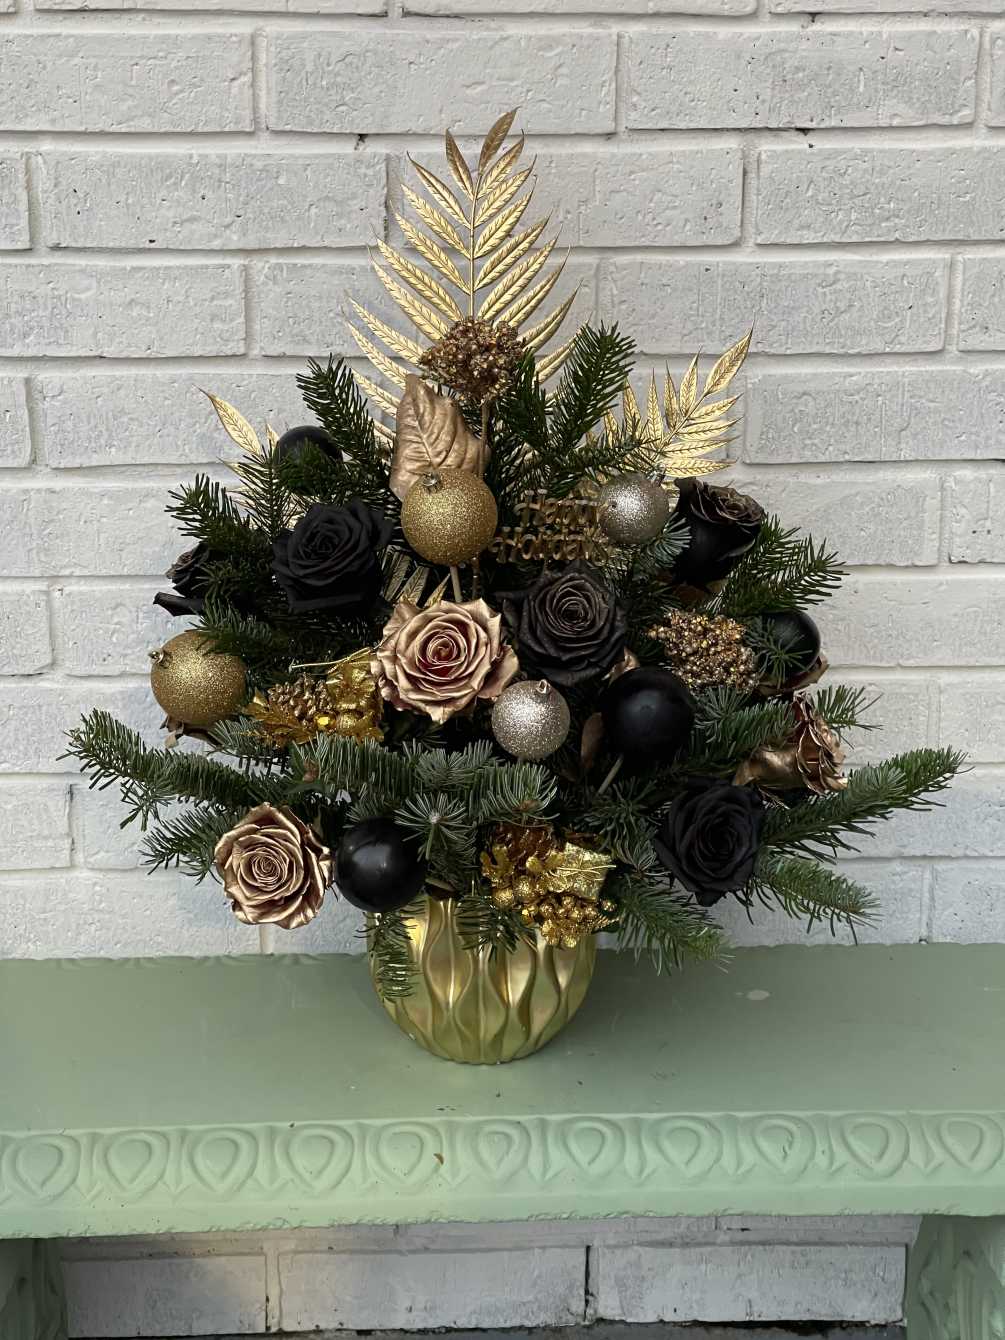 This beautiful tree is designed with beautiful black and gold roses, christmas